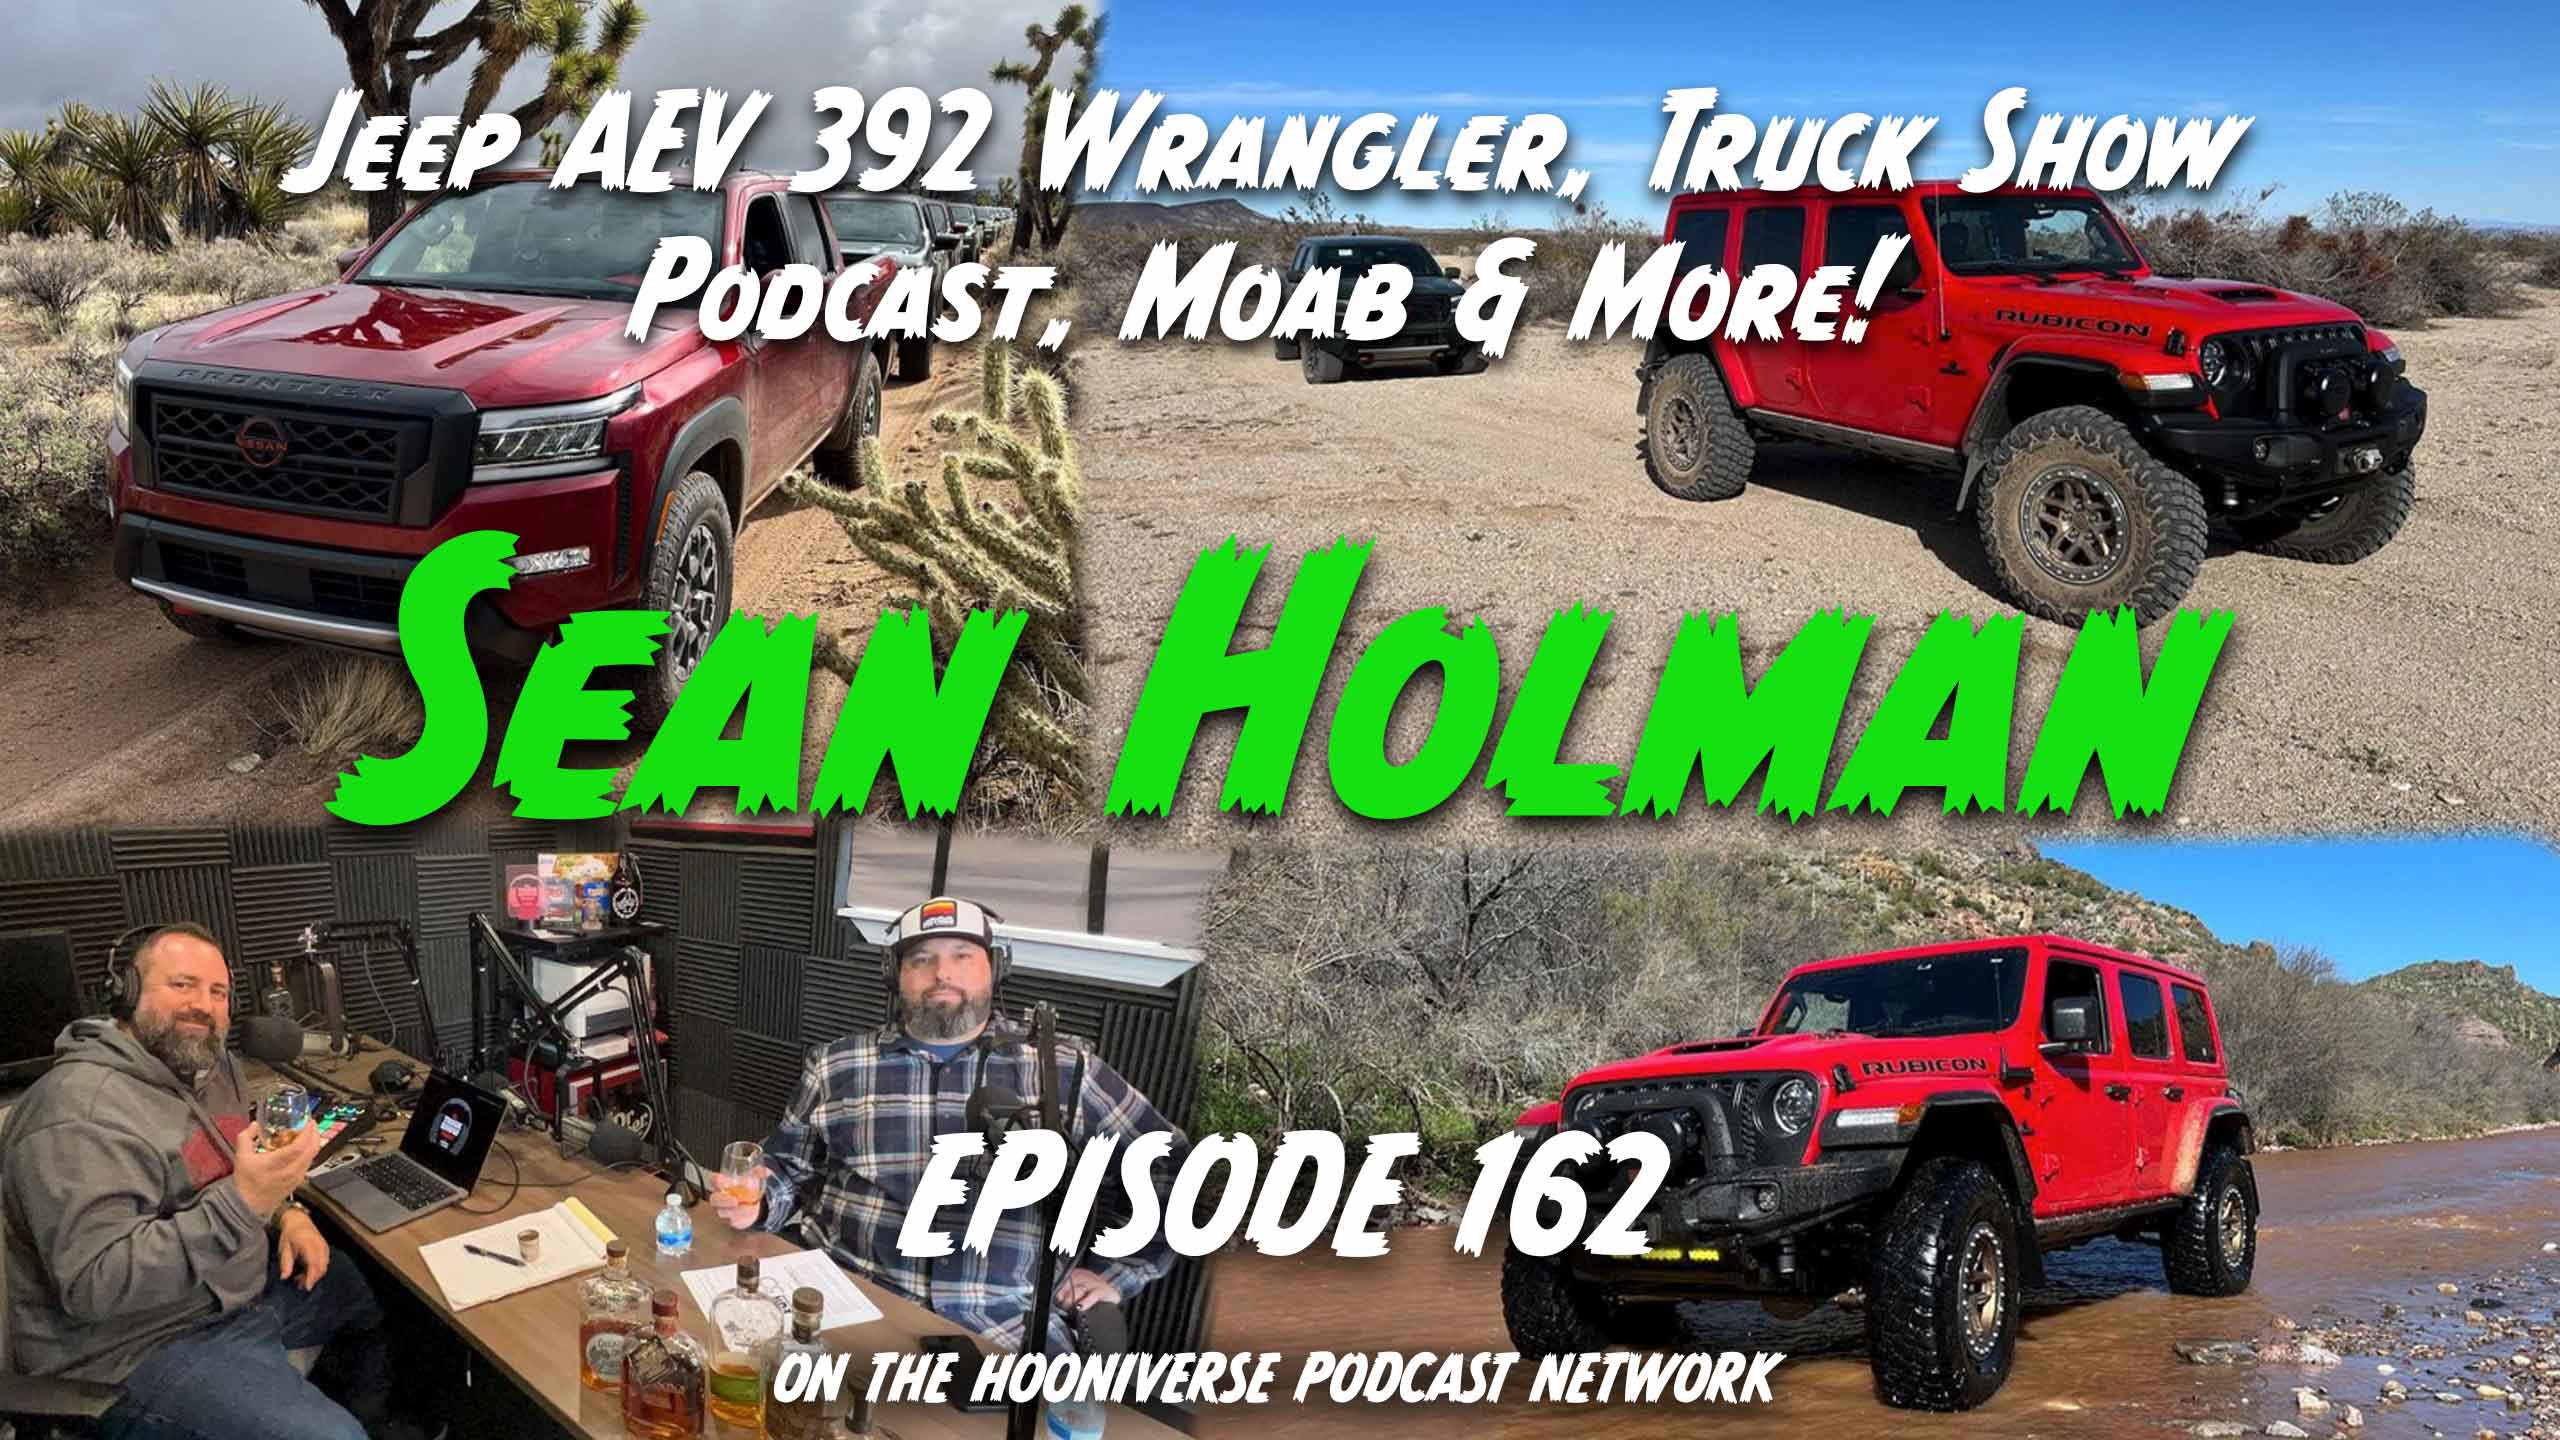 Sean-Holman-Truck-Show-Podcast-AEV-392-Wrangler-Off-the-Road-Again-Podcast-Episode-162